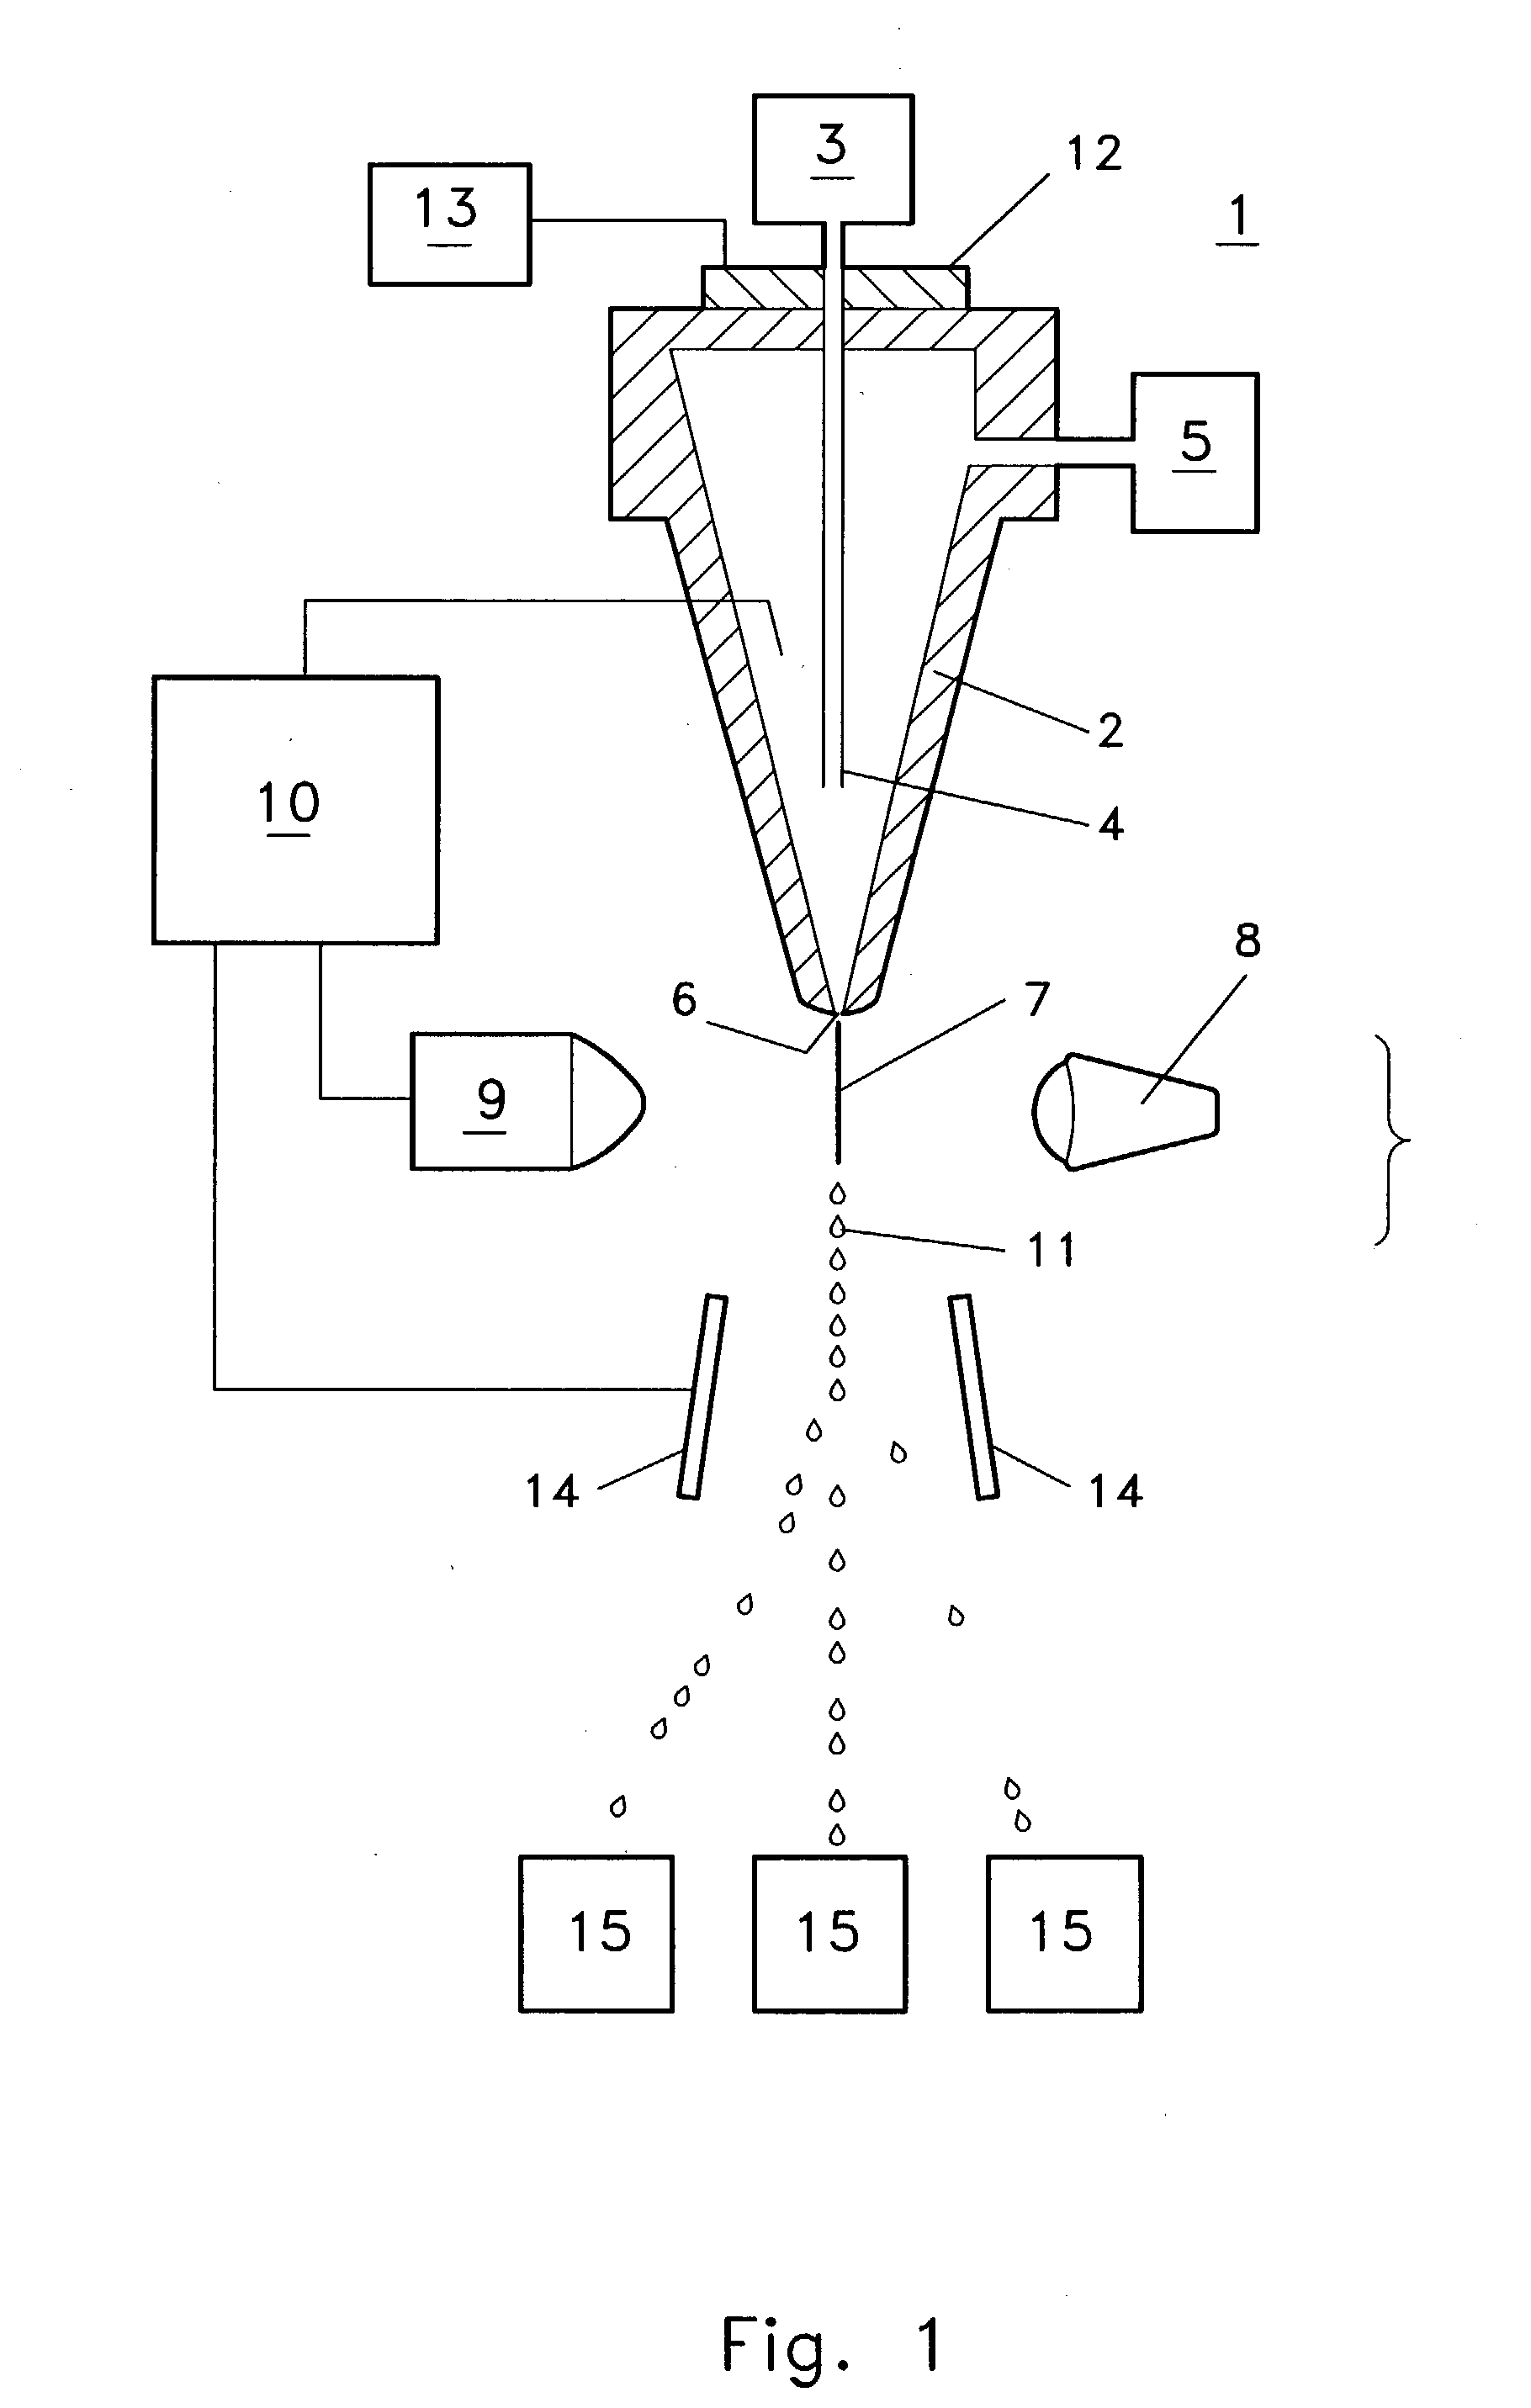 Environmental containment system for a flow cytometer